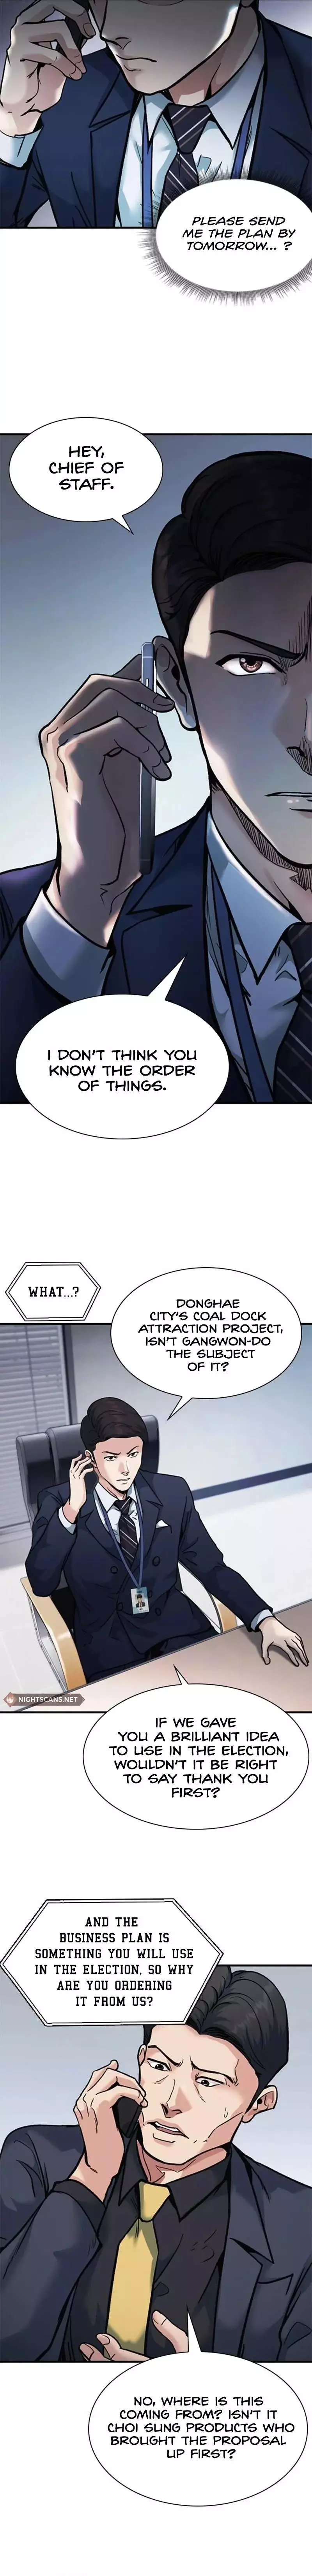 Chairman Kang, The New Employee - 18 page 5-201cc811